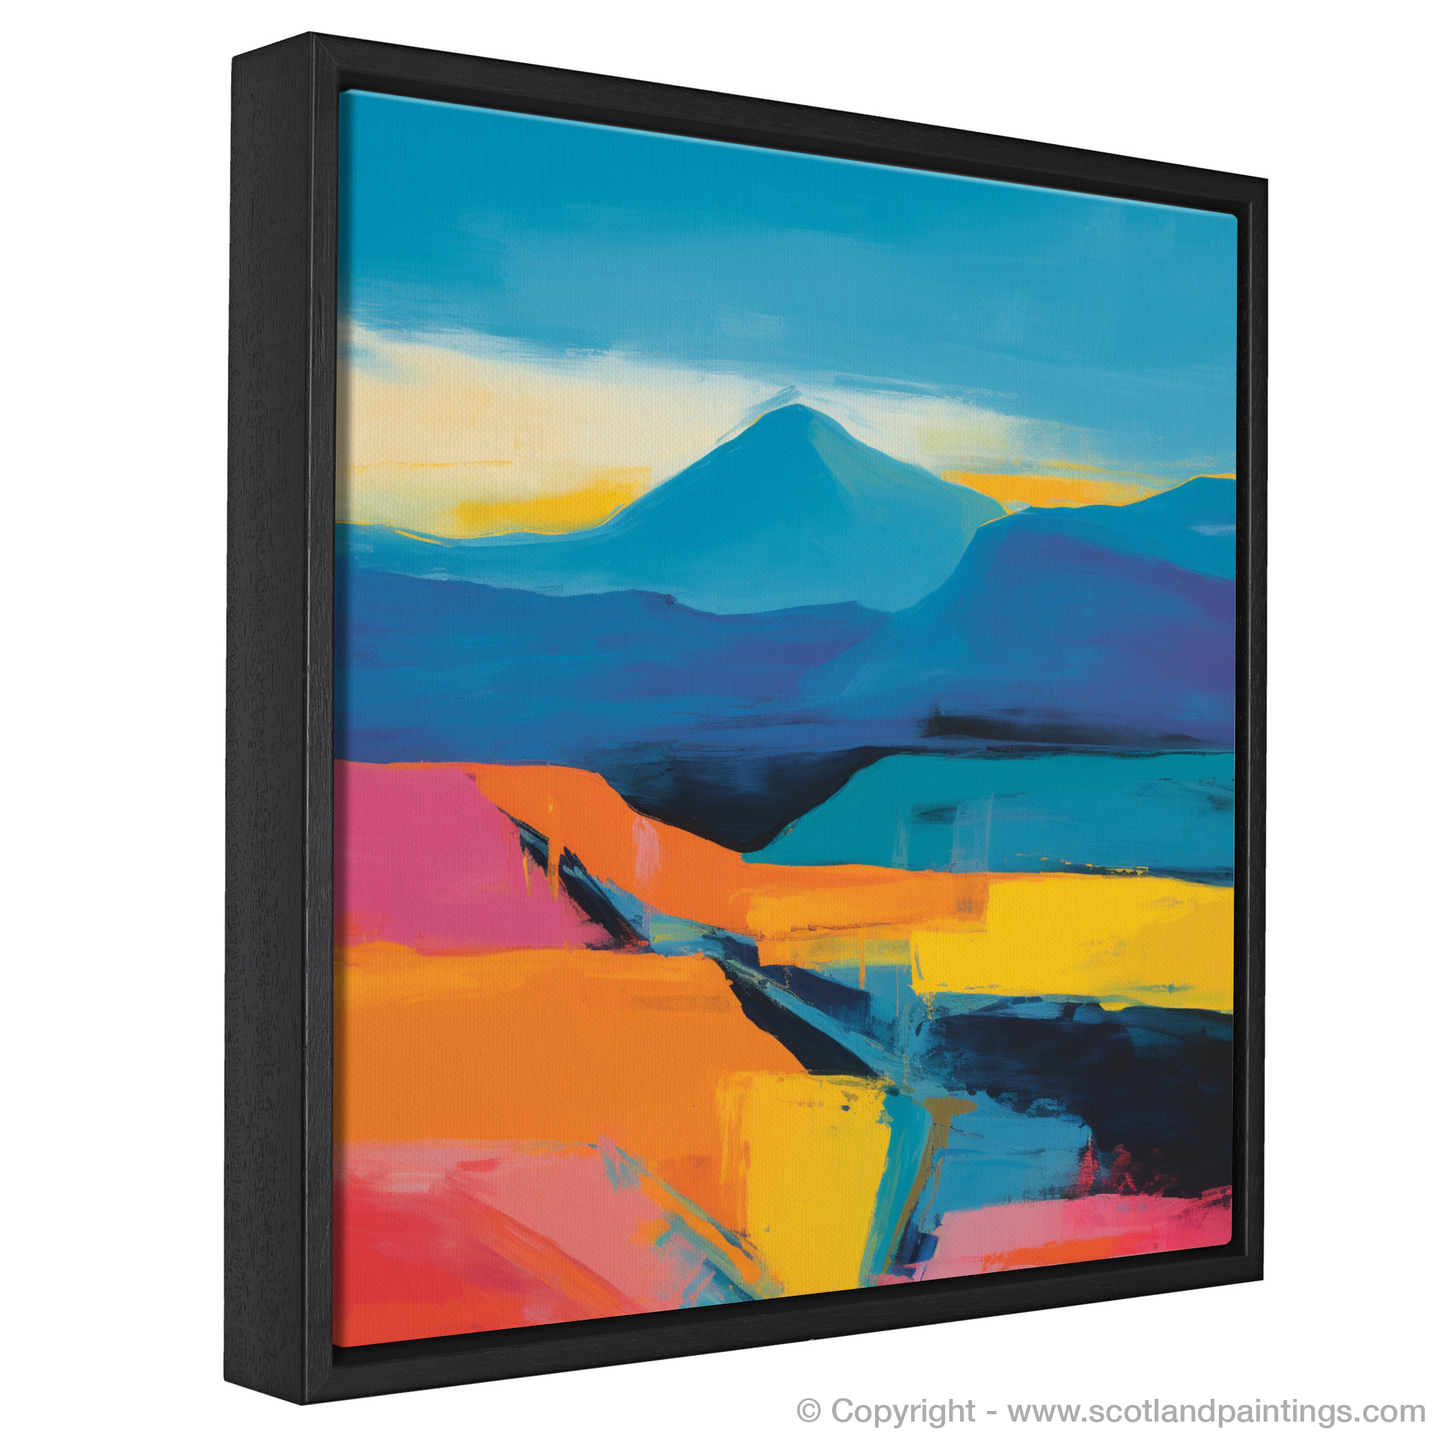 Painting and Art Print of The Cairnwell entitled "Abstract Cairnwell: A Vibrant Highland Tapestry".